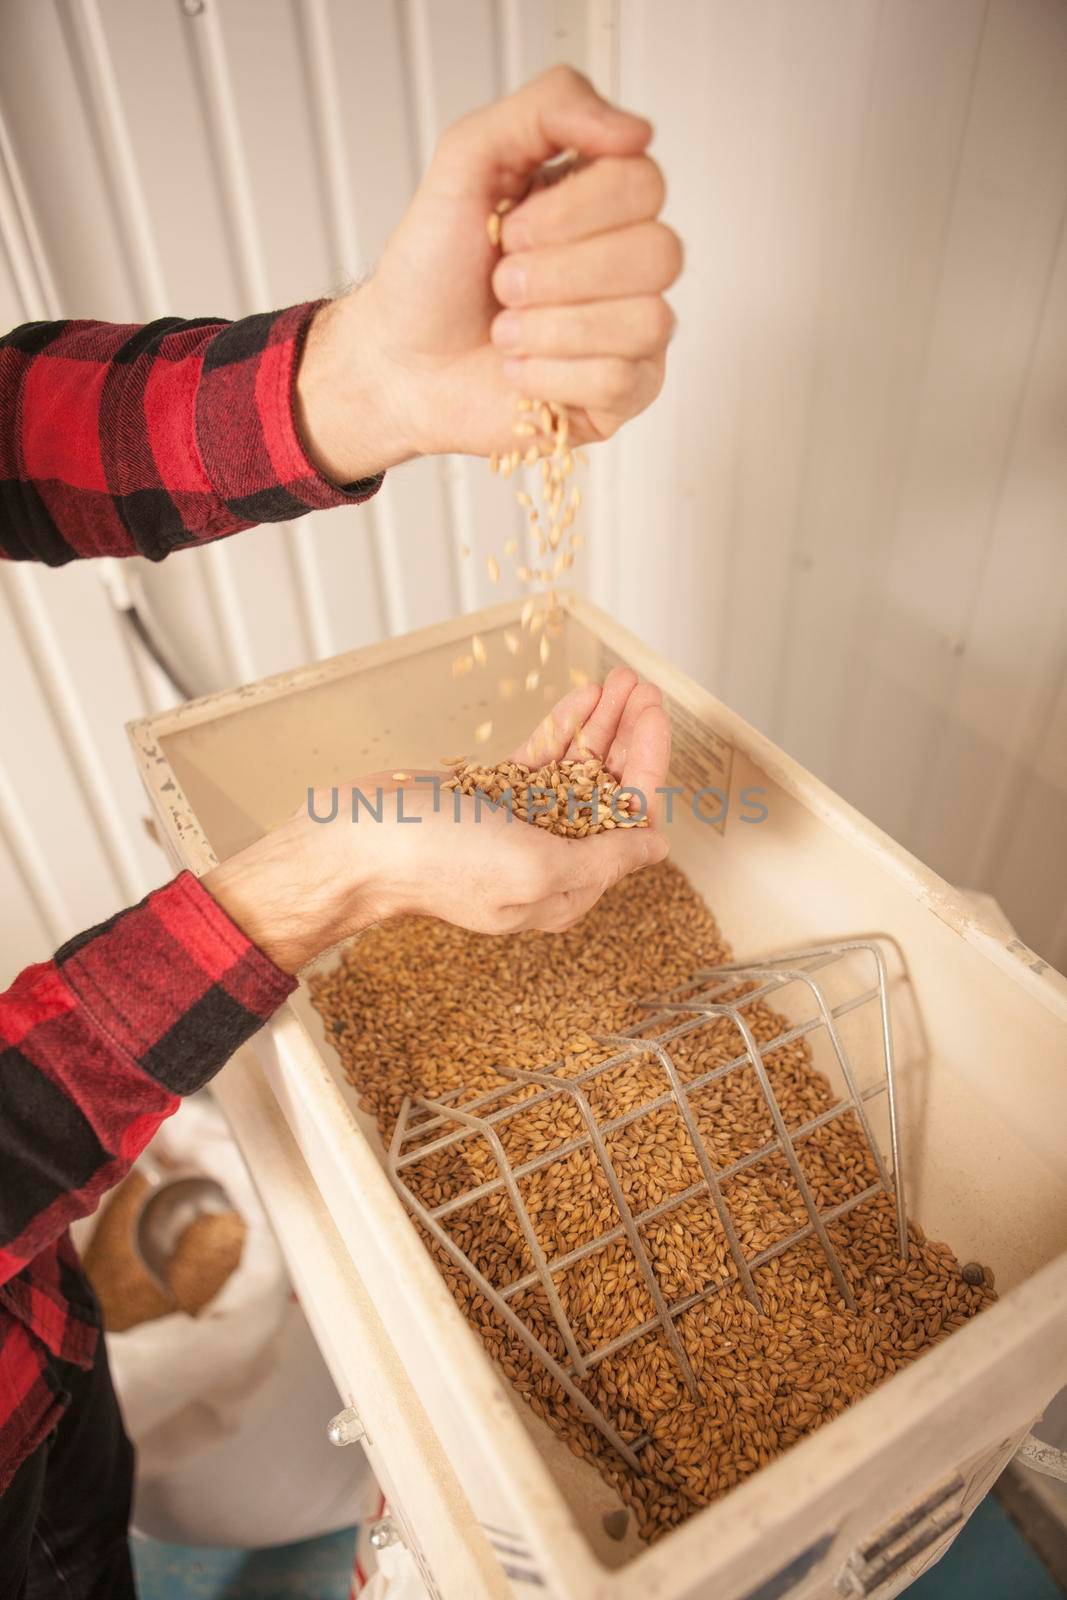 Vertical cropped close up of male hands pouring barley seeds into gain mill at microbrewery